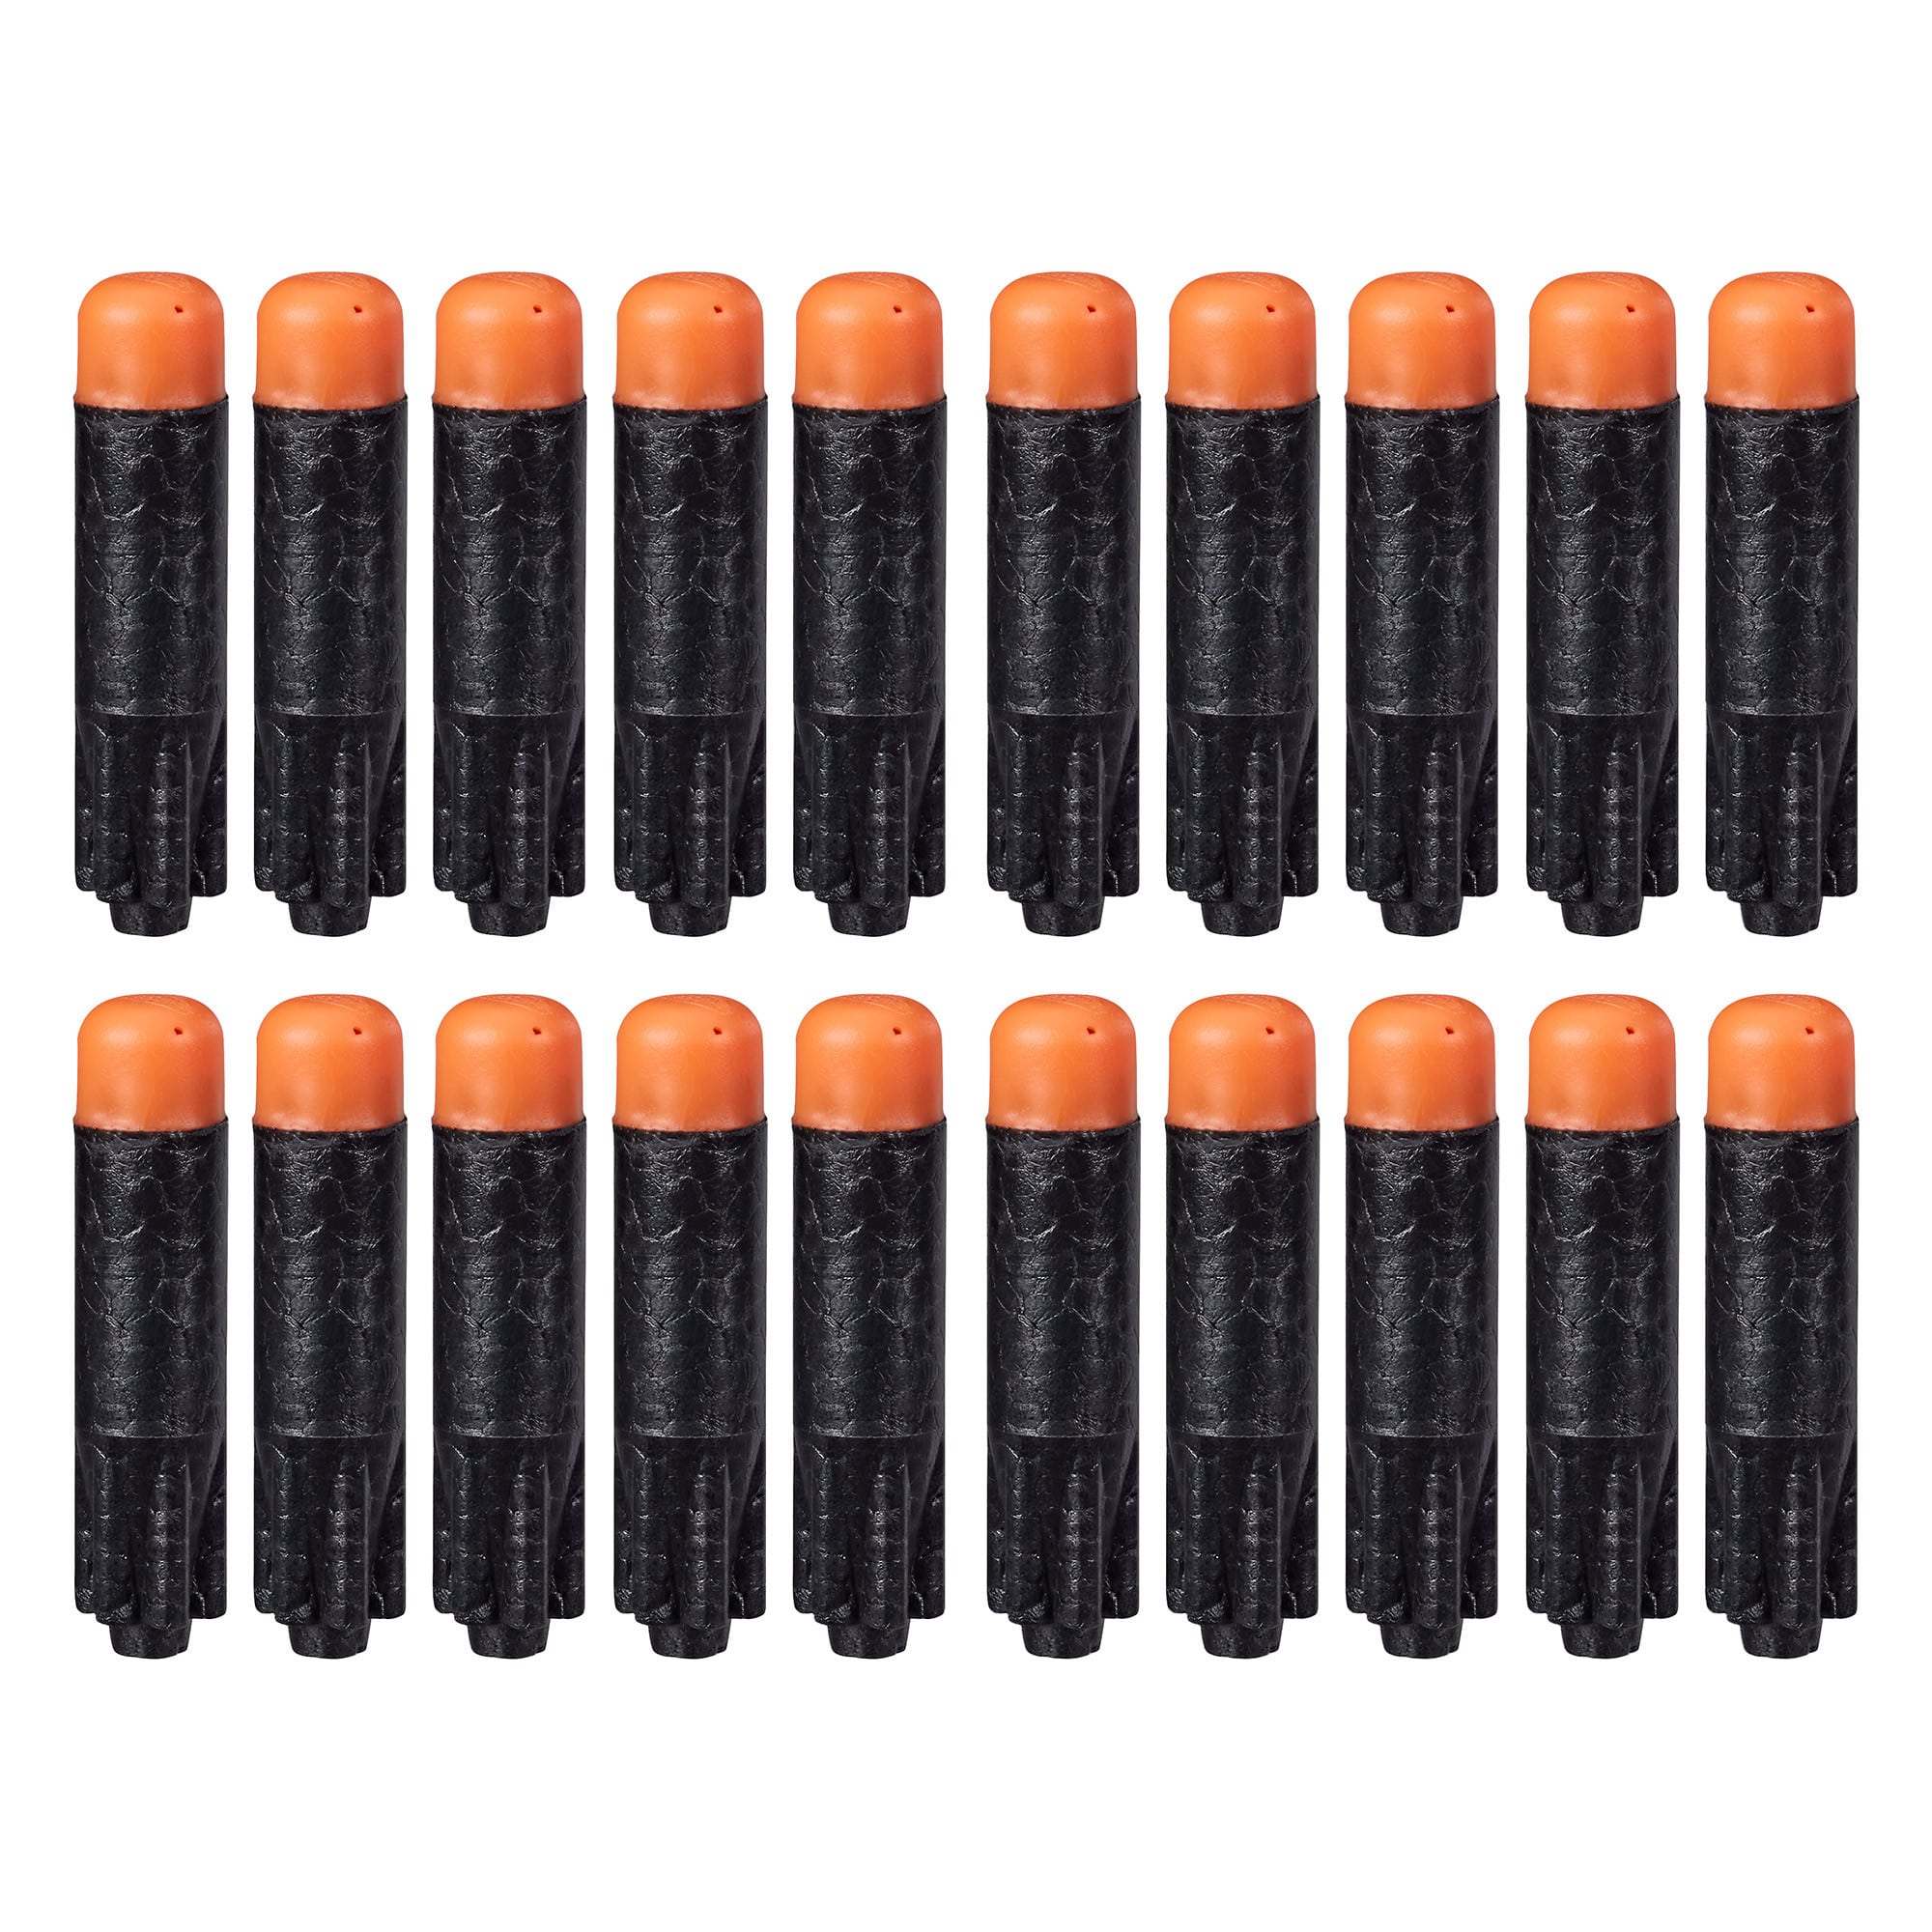 Nerf - Ultra One Darts - 20 Pack Refill